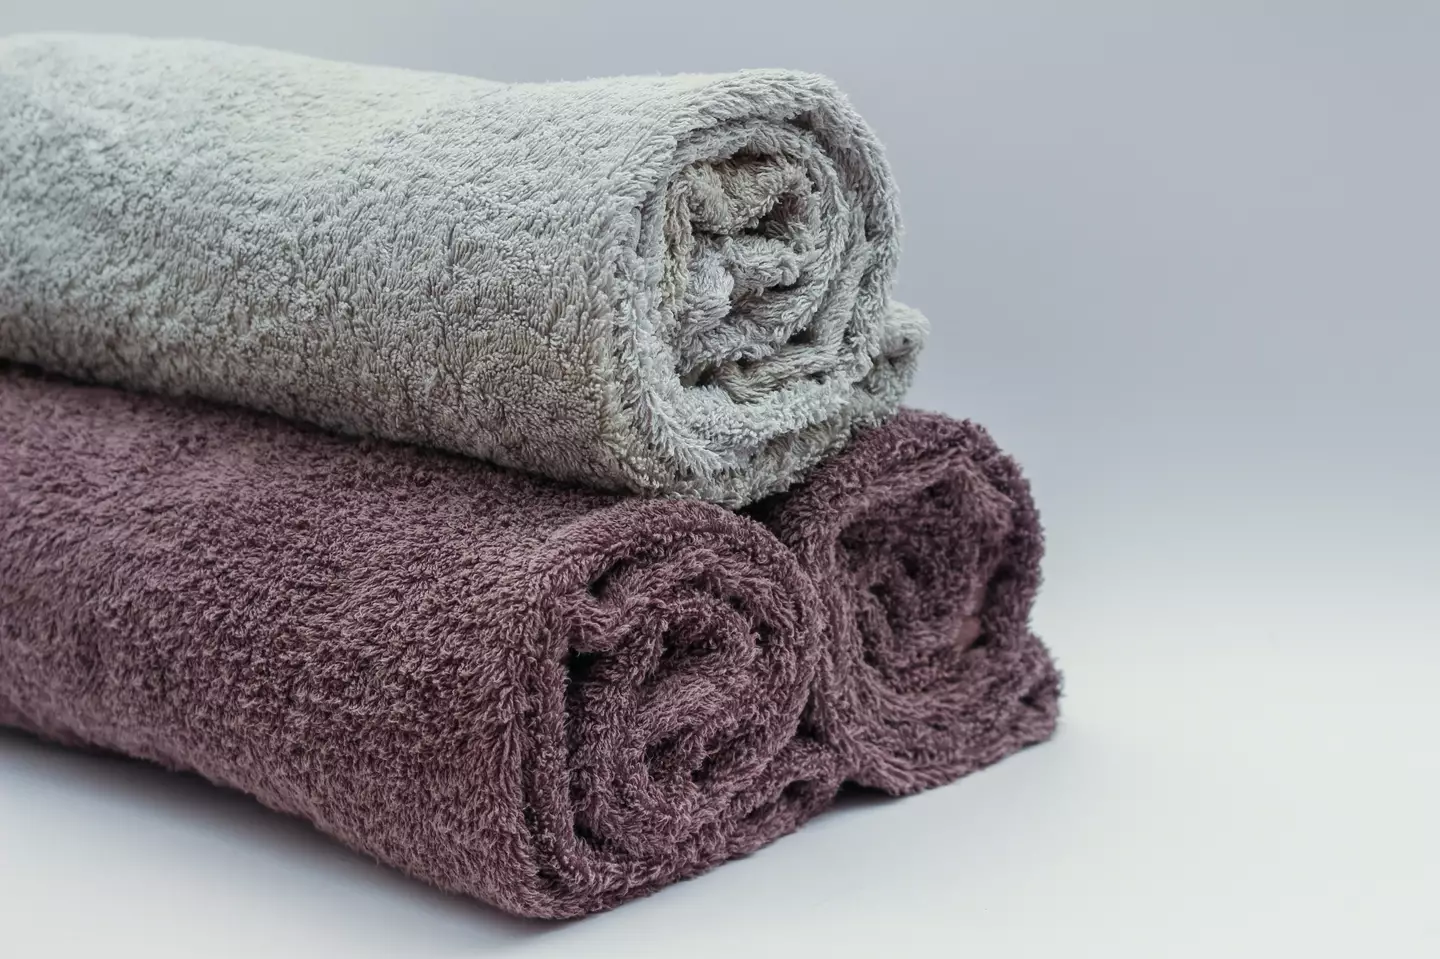 Guidance shows that towels should be washed after every three uses.